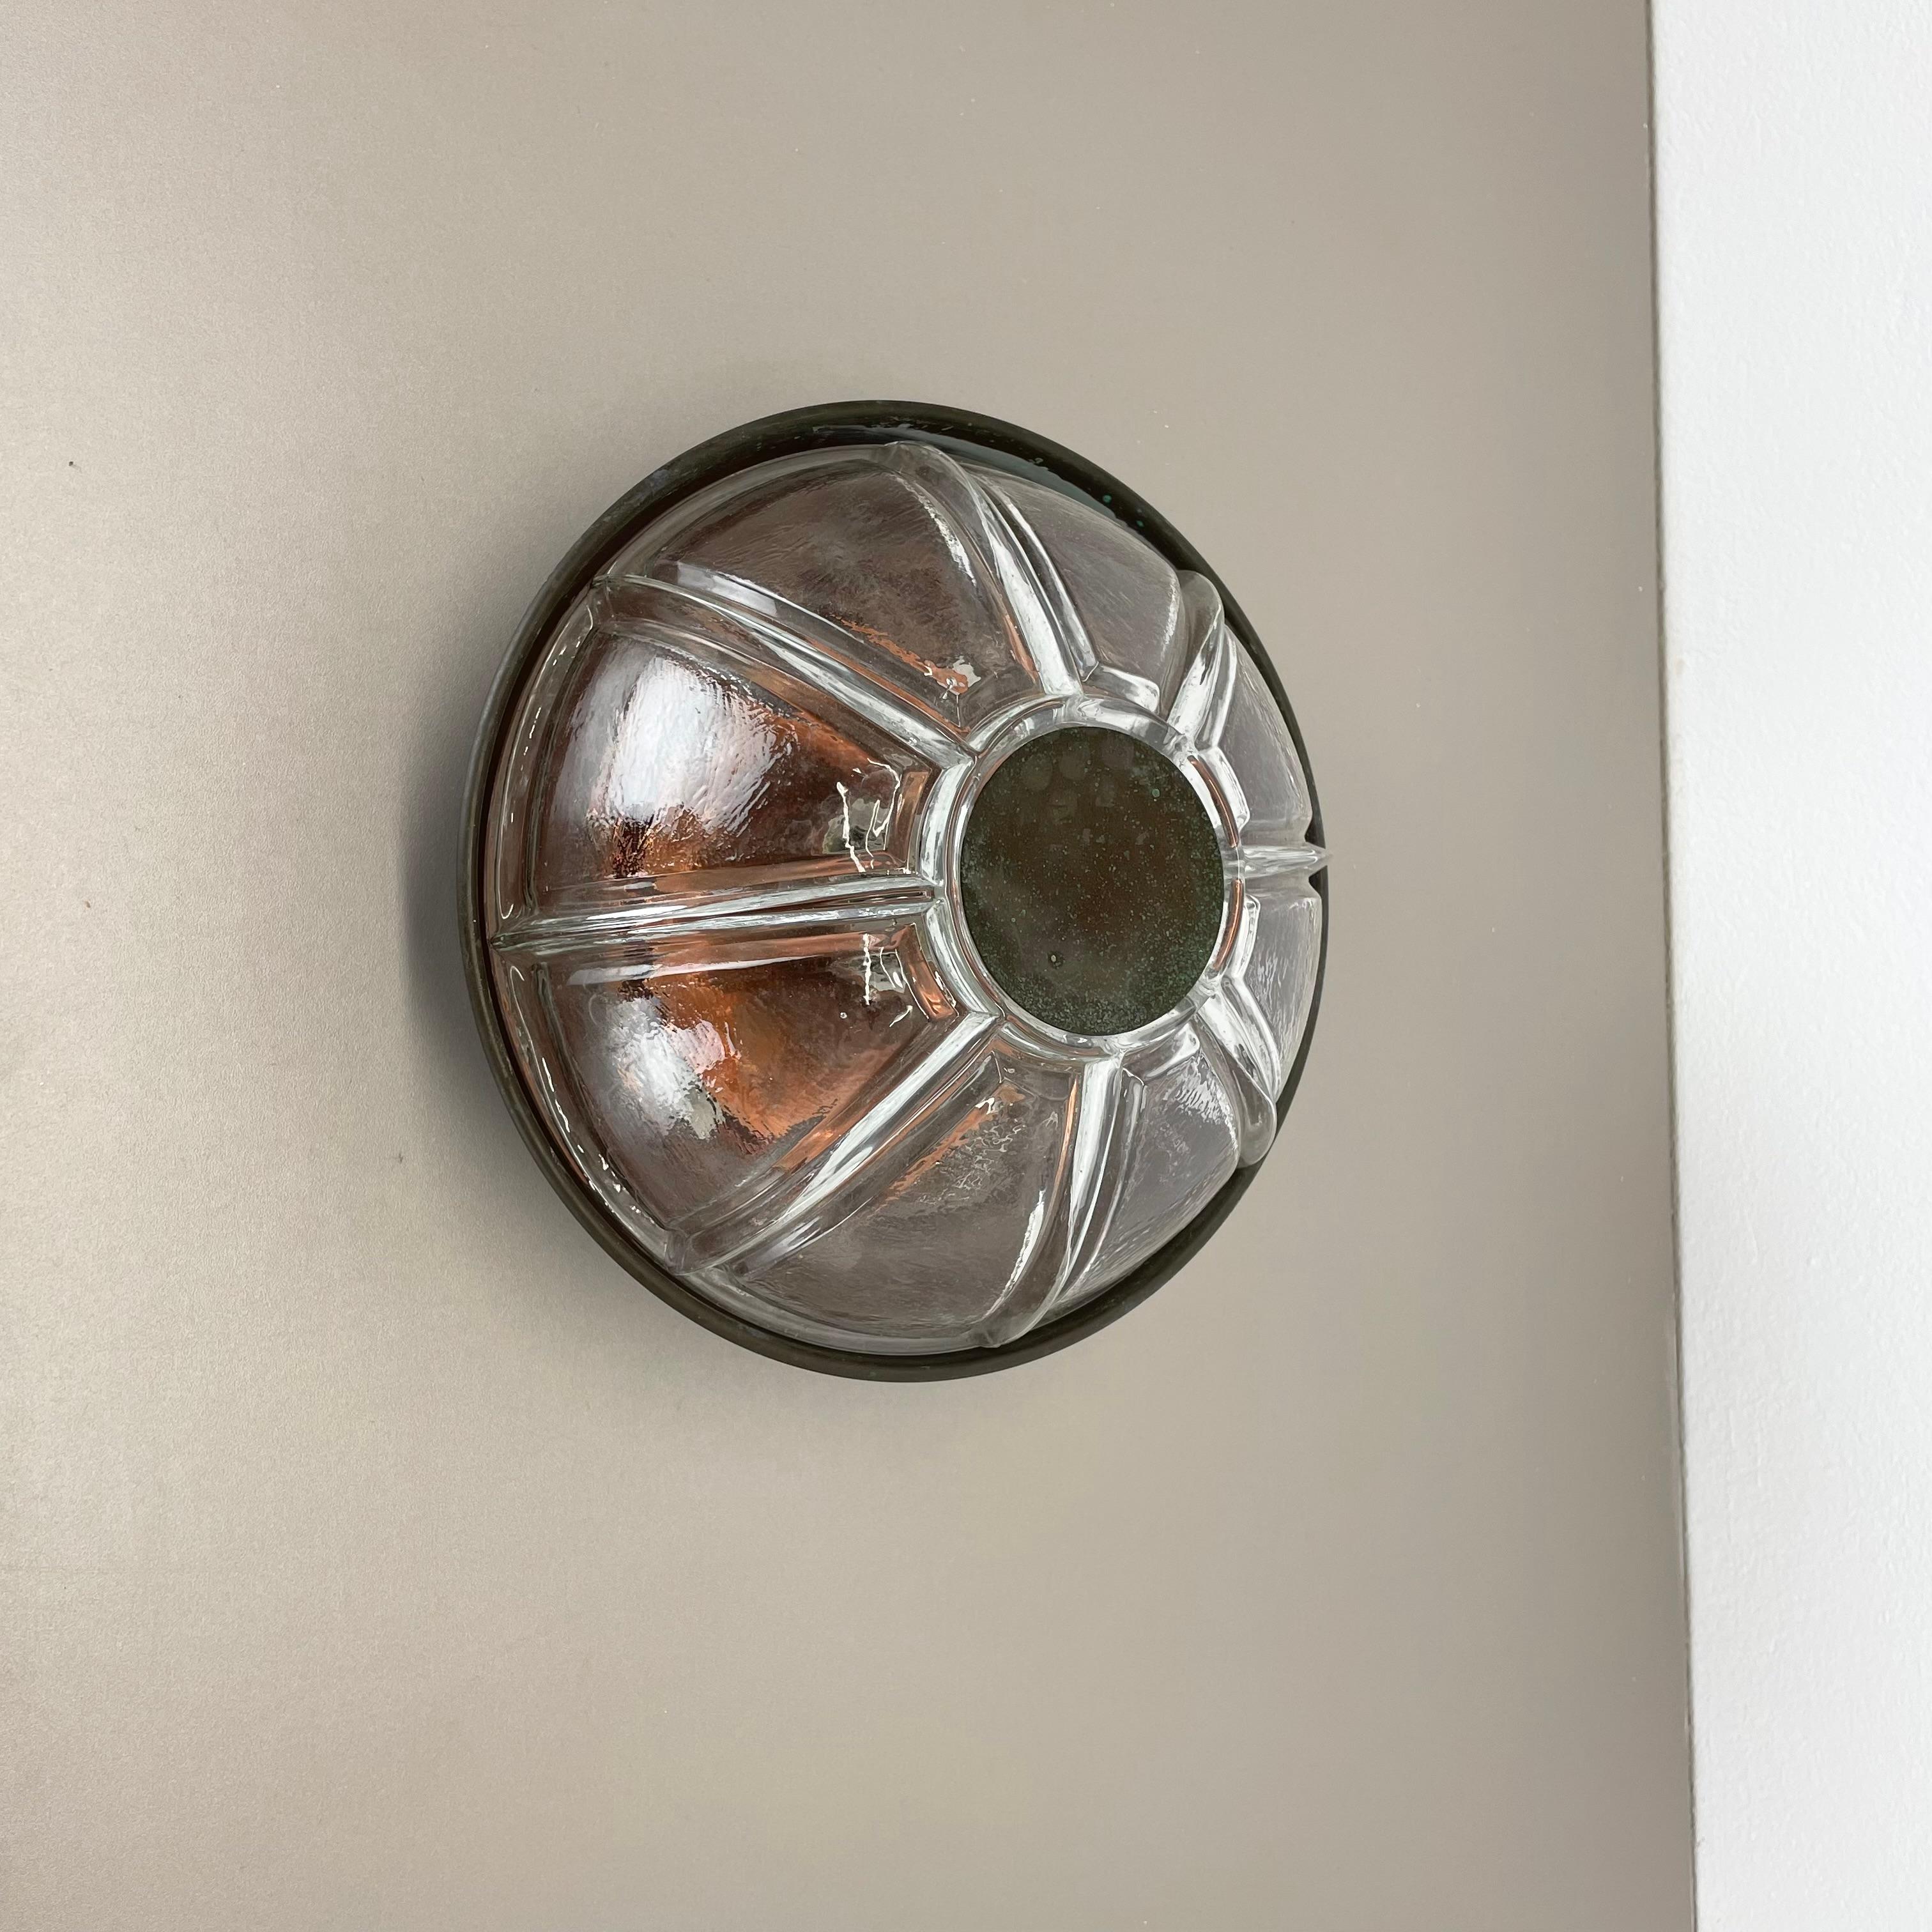 Article:

wall light, BOOM collection by BEGA Lights


Producer:

Bega Lights, Germany



Origin:

Germany



Age:

1980s



Original 1980s modernist German wall Light made of high quality  glass with a a brutalist surface copper wall fixation